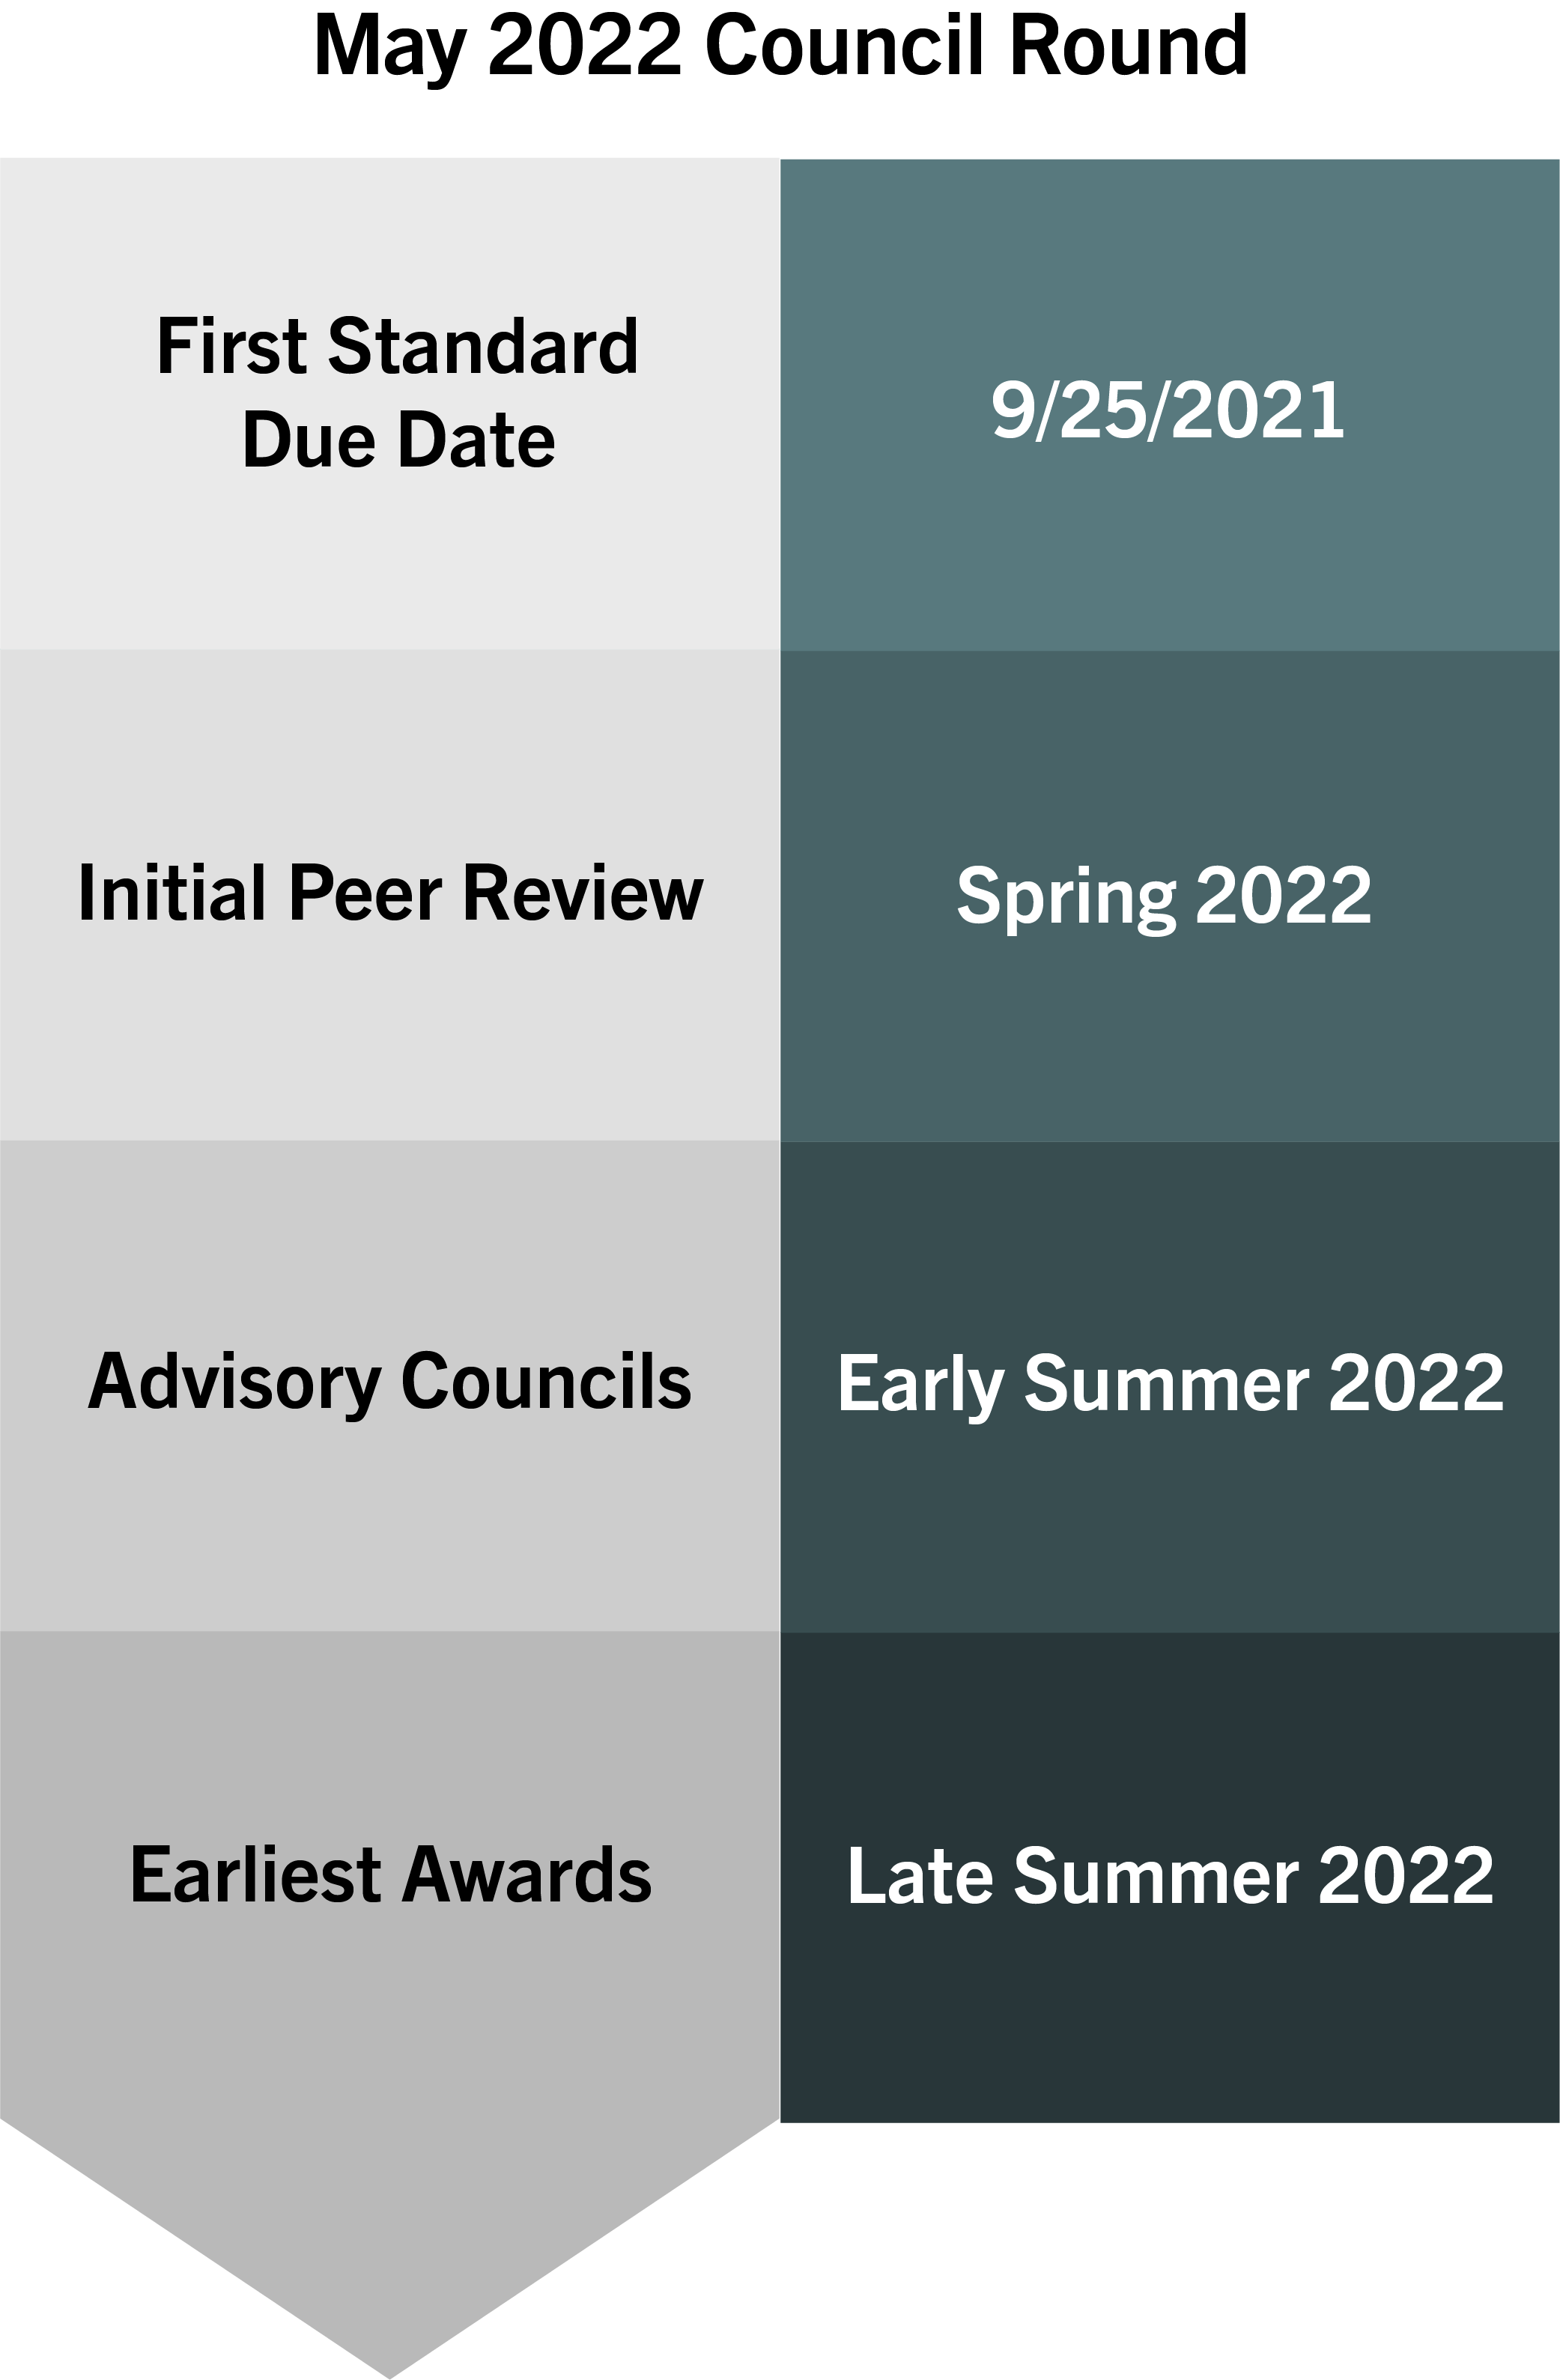 process flow for May 2022 Council Round - First Standard due date 9/25/2021, initial peer review Spring 2022, Advisory councils early summer 2022, earliest awards late summer 2022.